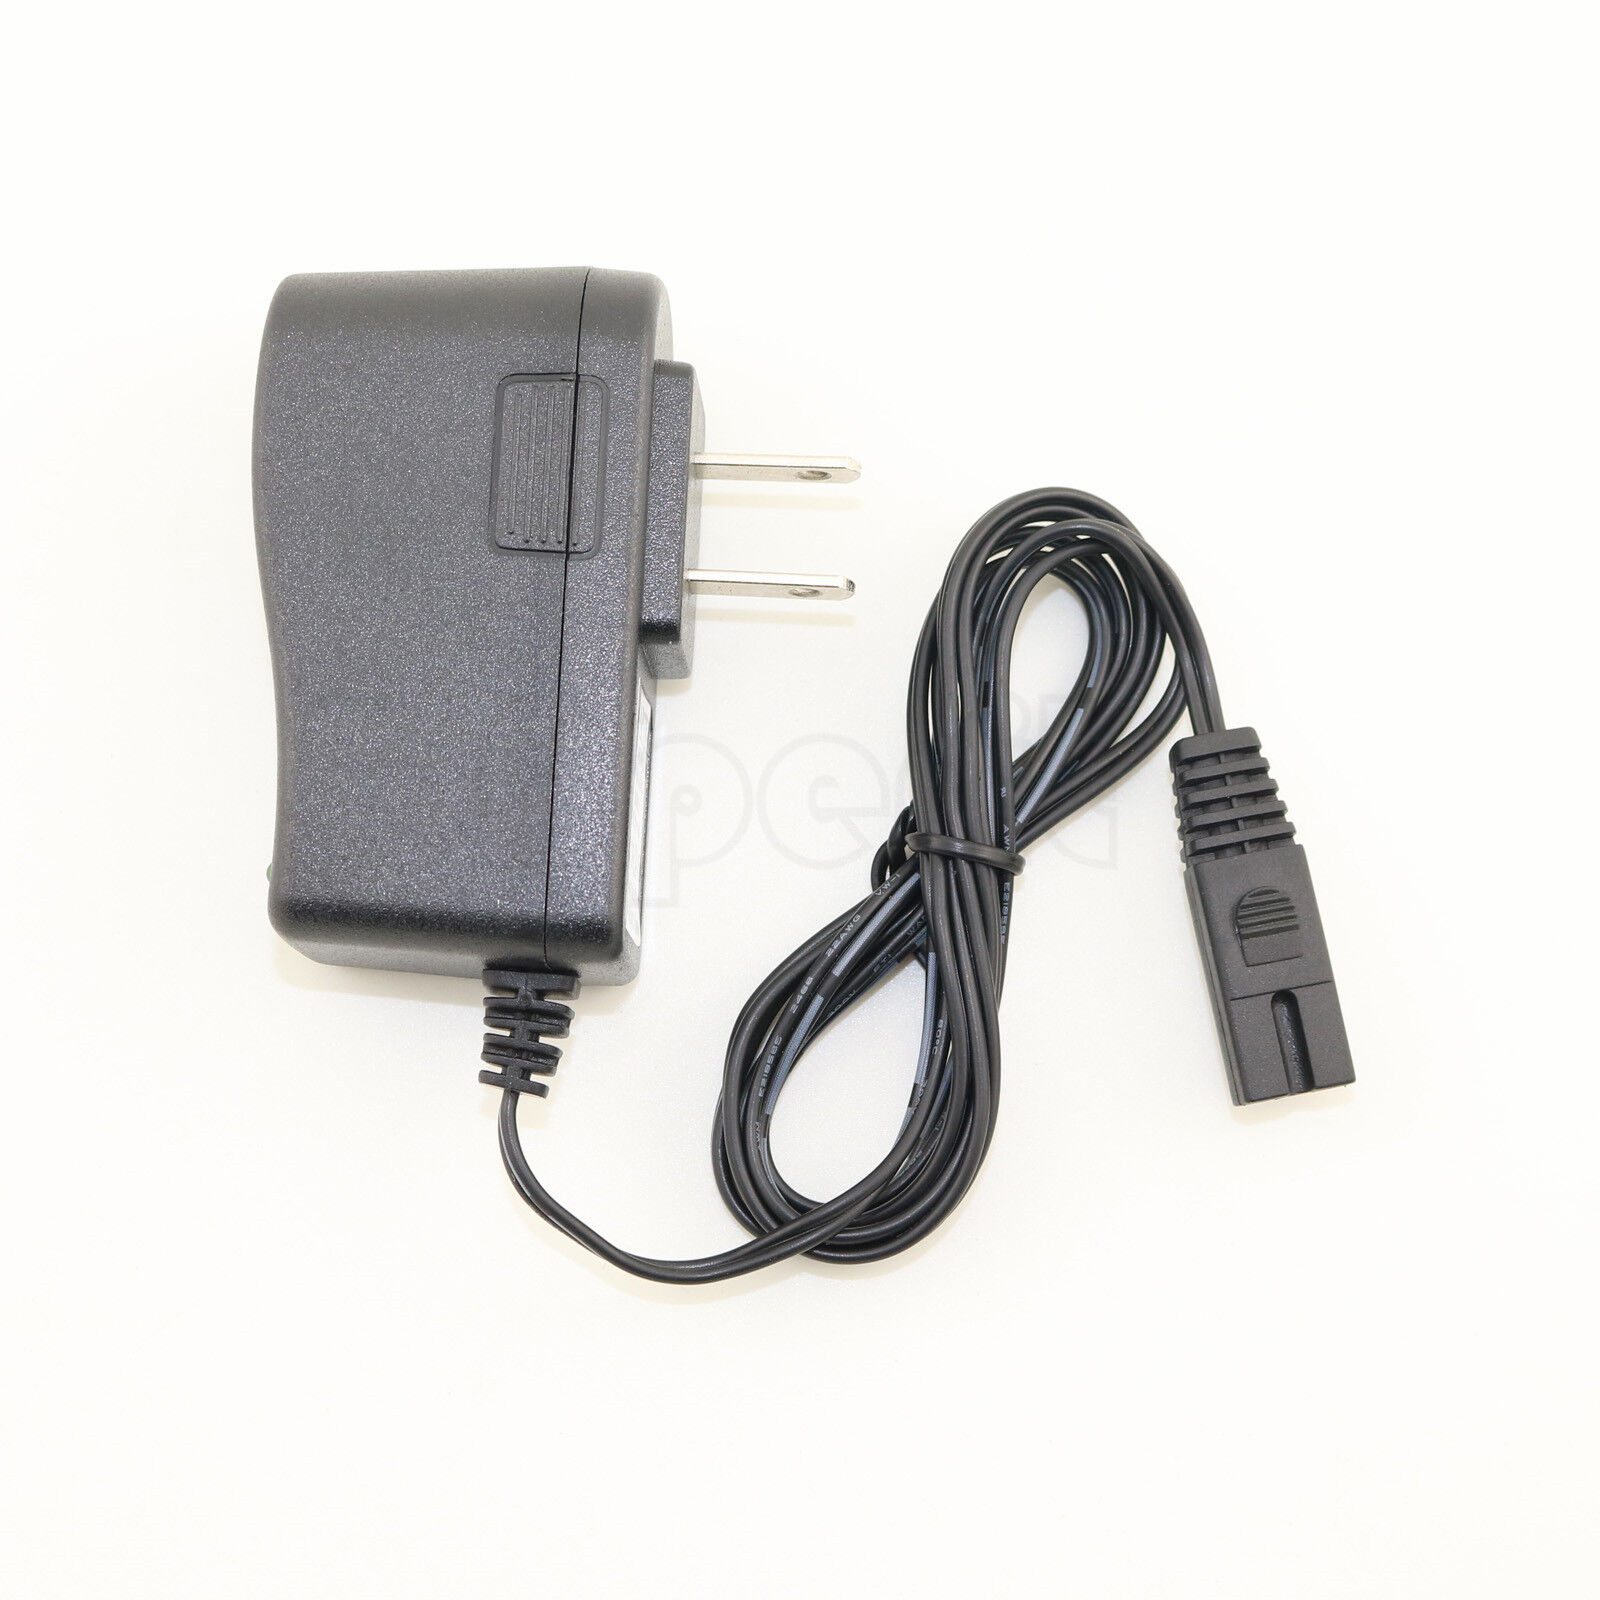 AC Adapter Power Cord Charger For Wahl Bump-Free Shaver 7060, 7060-700, 7339 AC Adapter Power Cord Charger For Wahl Bum